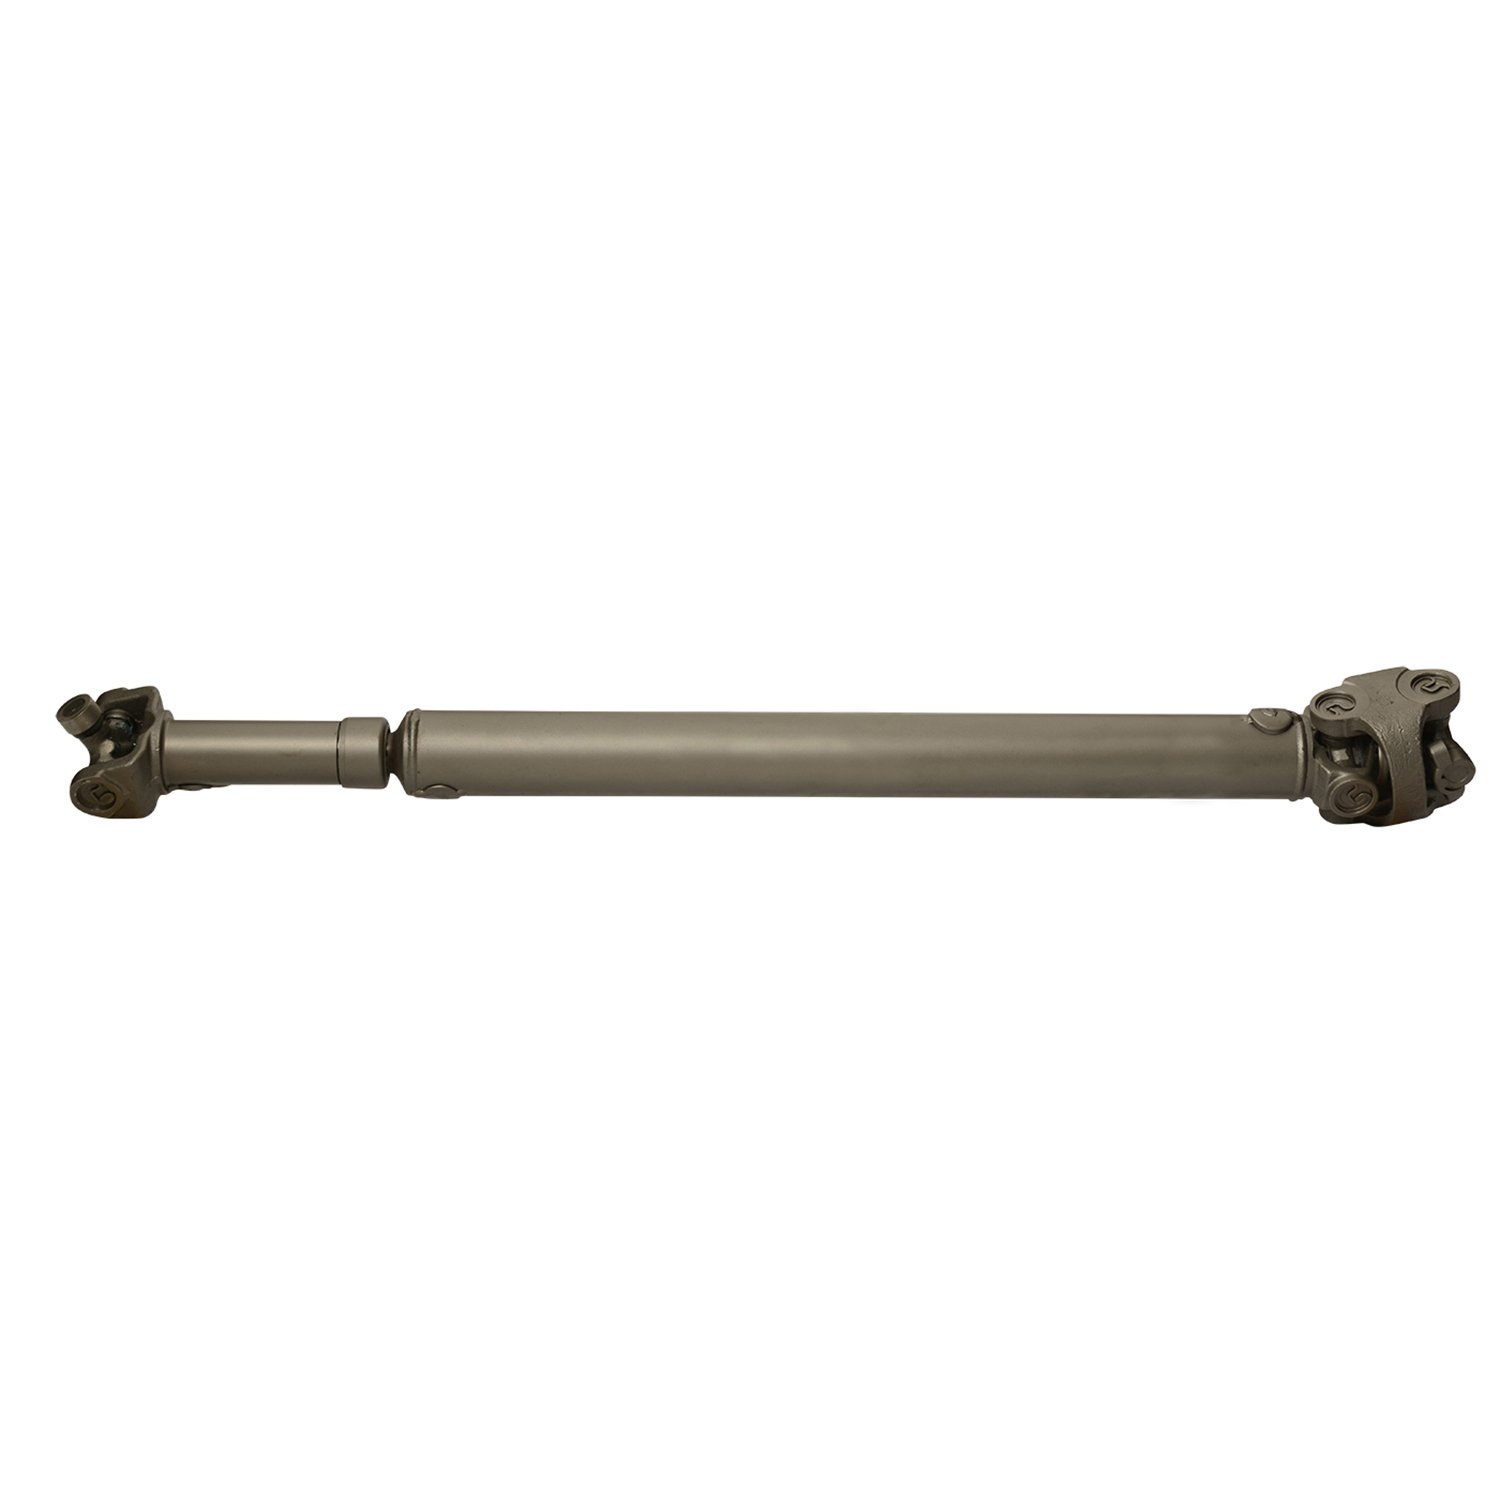 USA Standard ZDS9160 Rear Driveshaft, For Bronco, 30-5/8 in. Center-To-Center